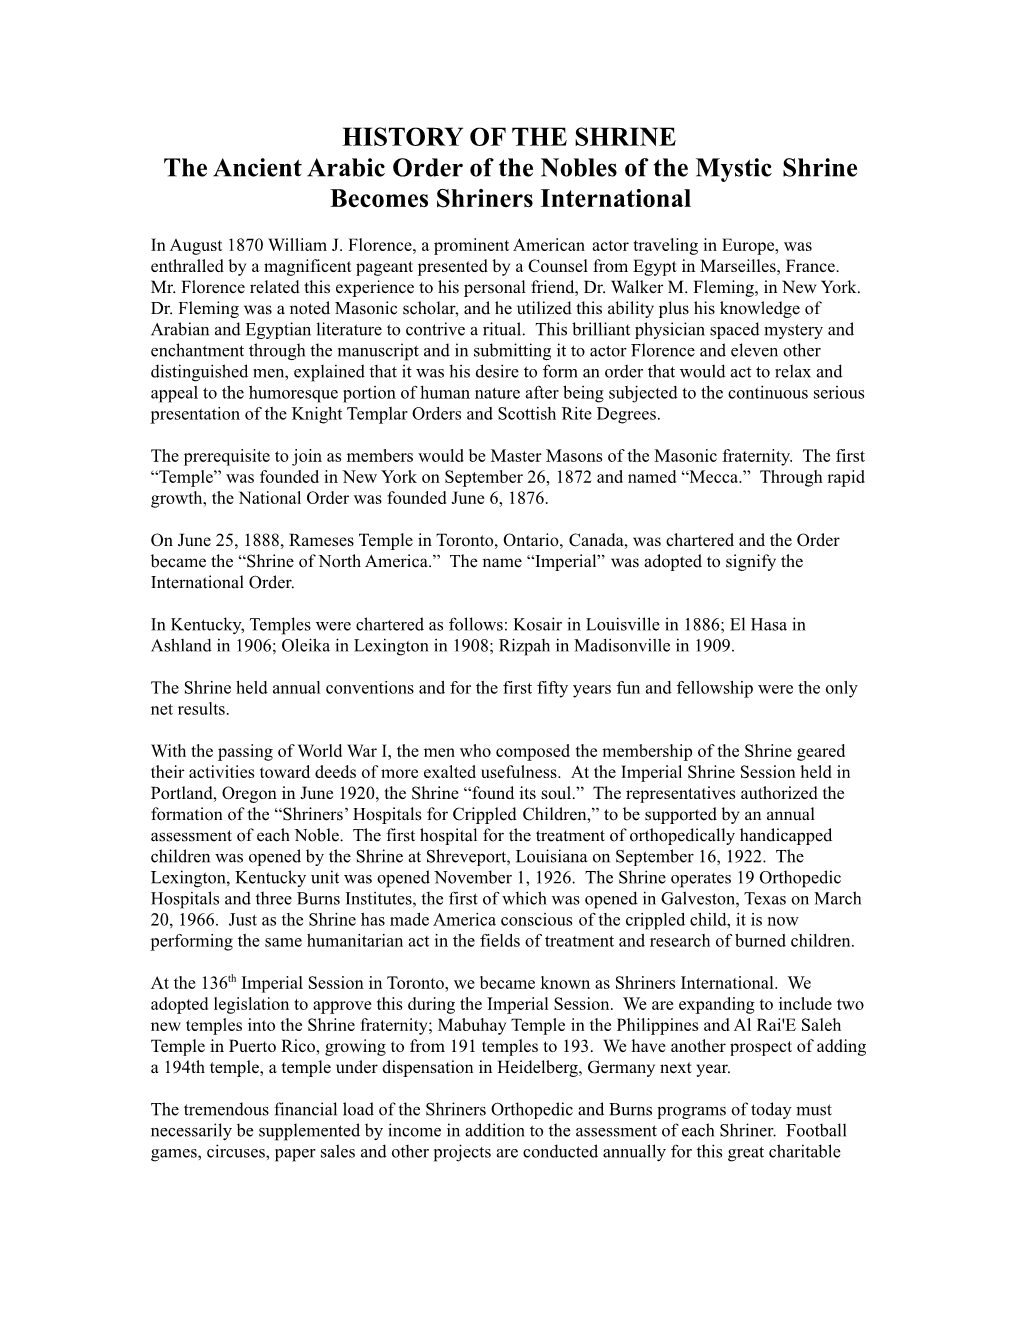 HISTORY of the SHRINE the Ancient Arabic Order of the Nobles of the Mystic Shrine Becomes Shriners International